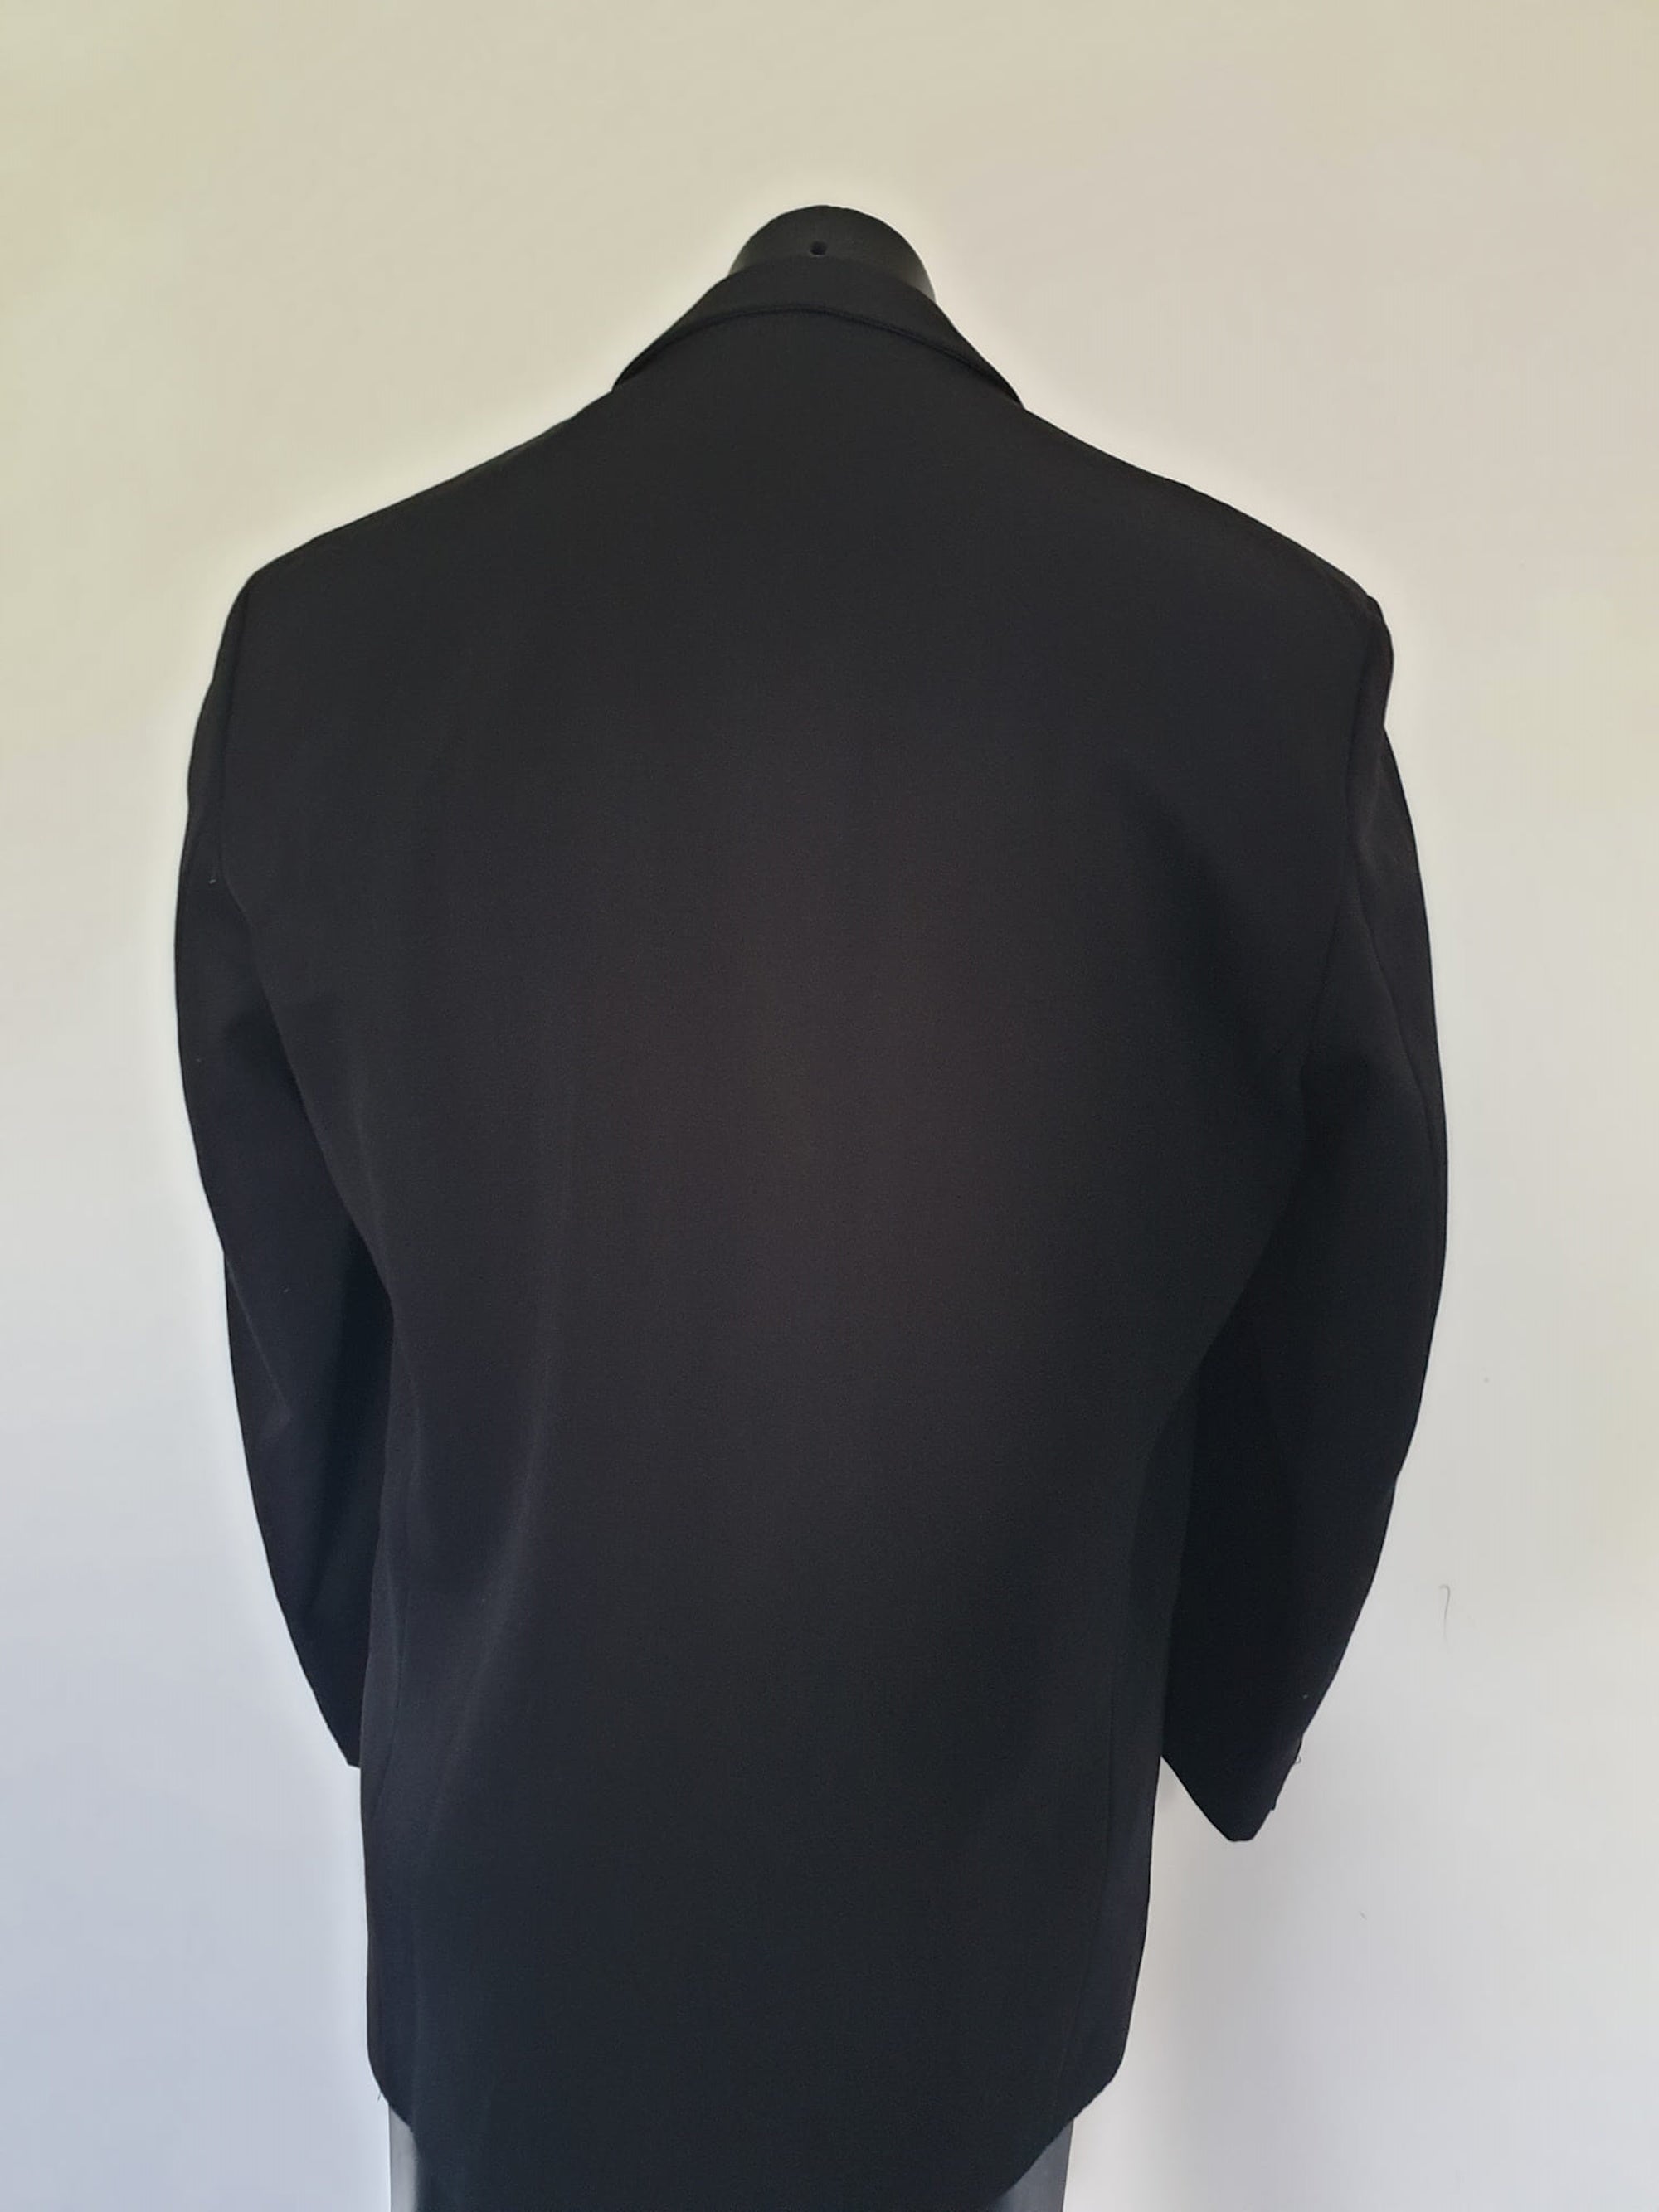 vintage  black high buttoned leisure jacket by Arch size 38